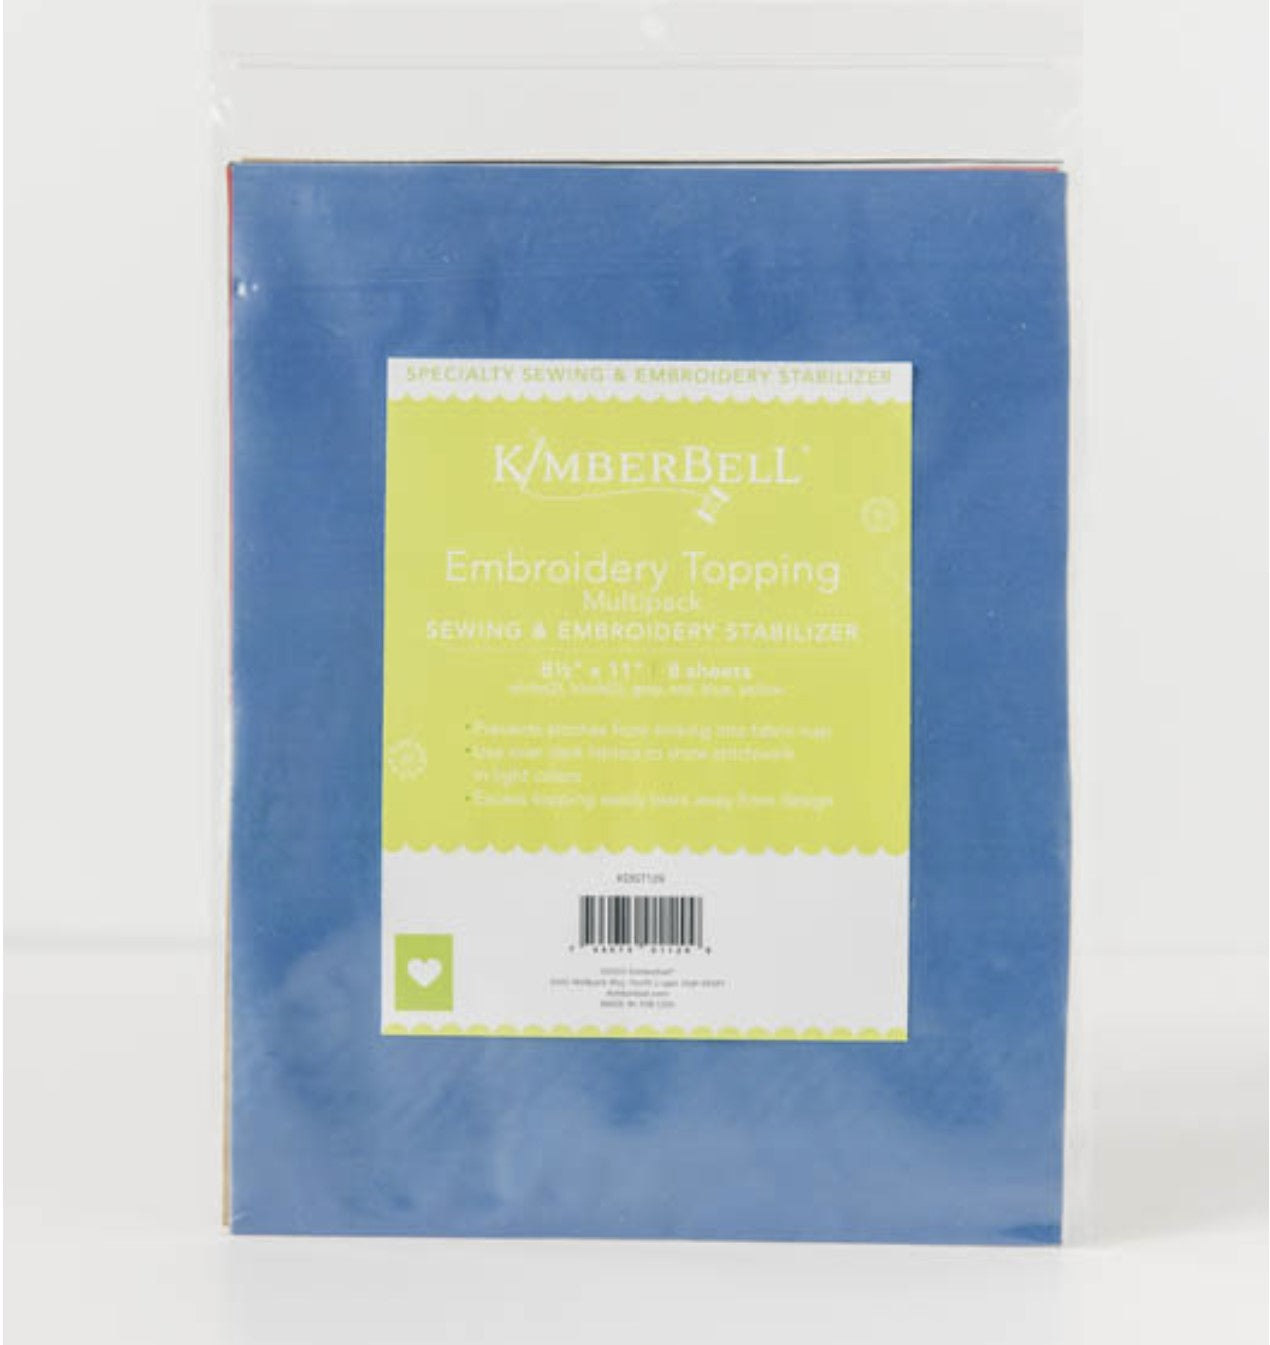 Kimberbell Embroidery Topping